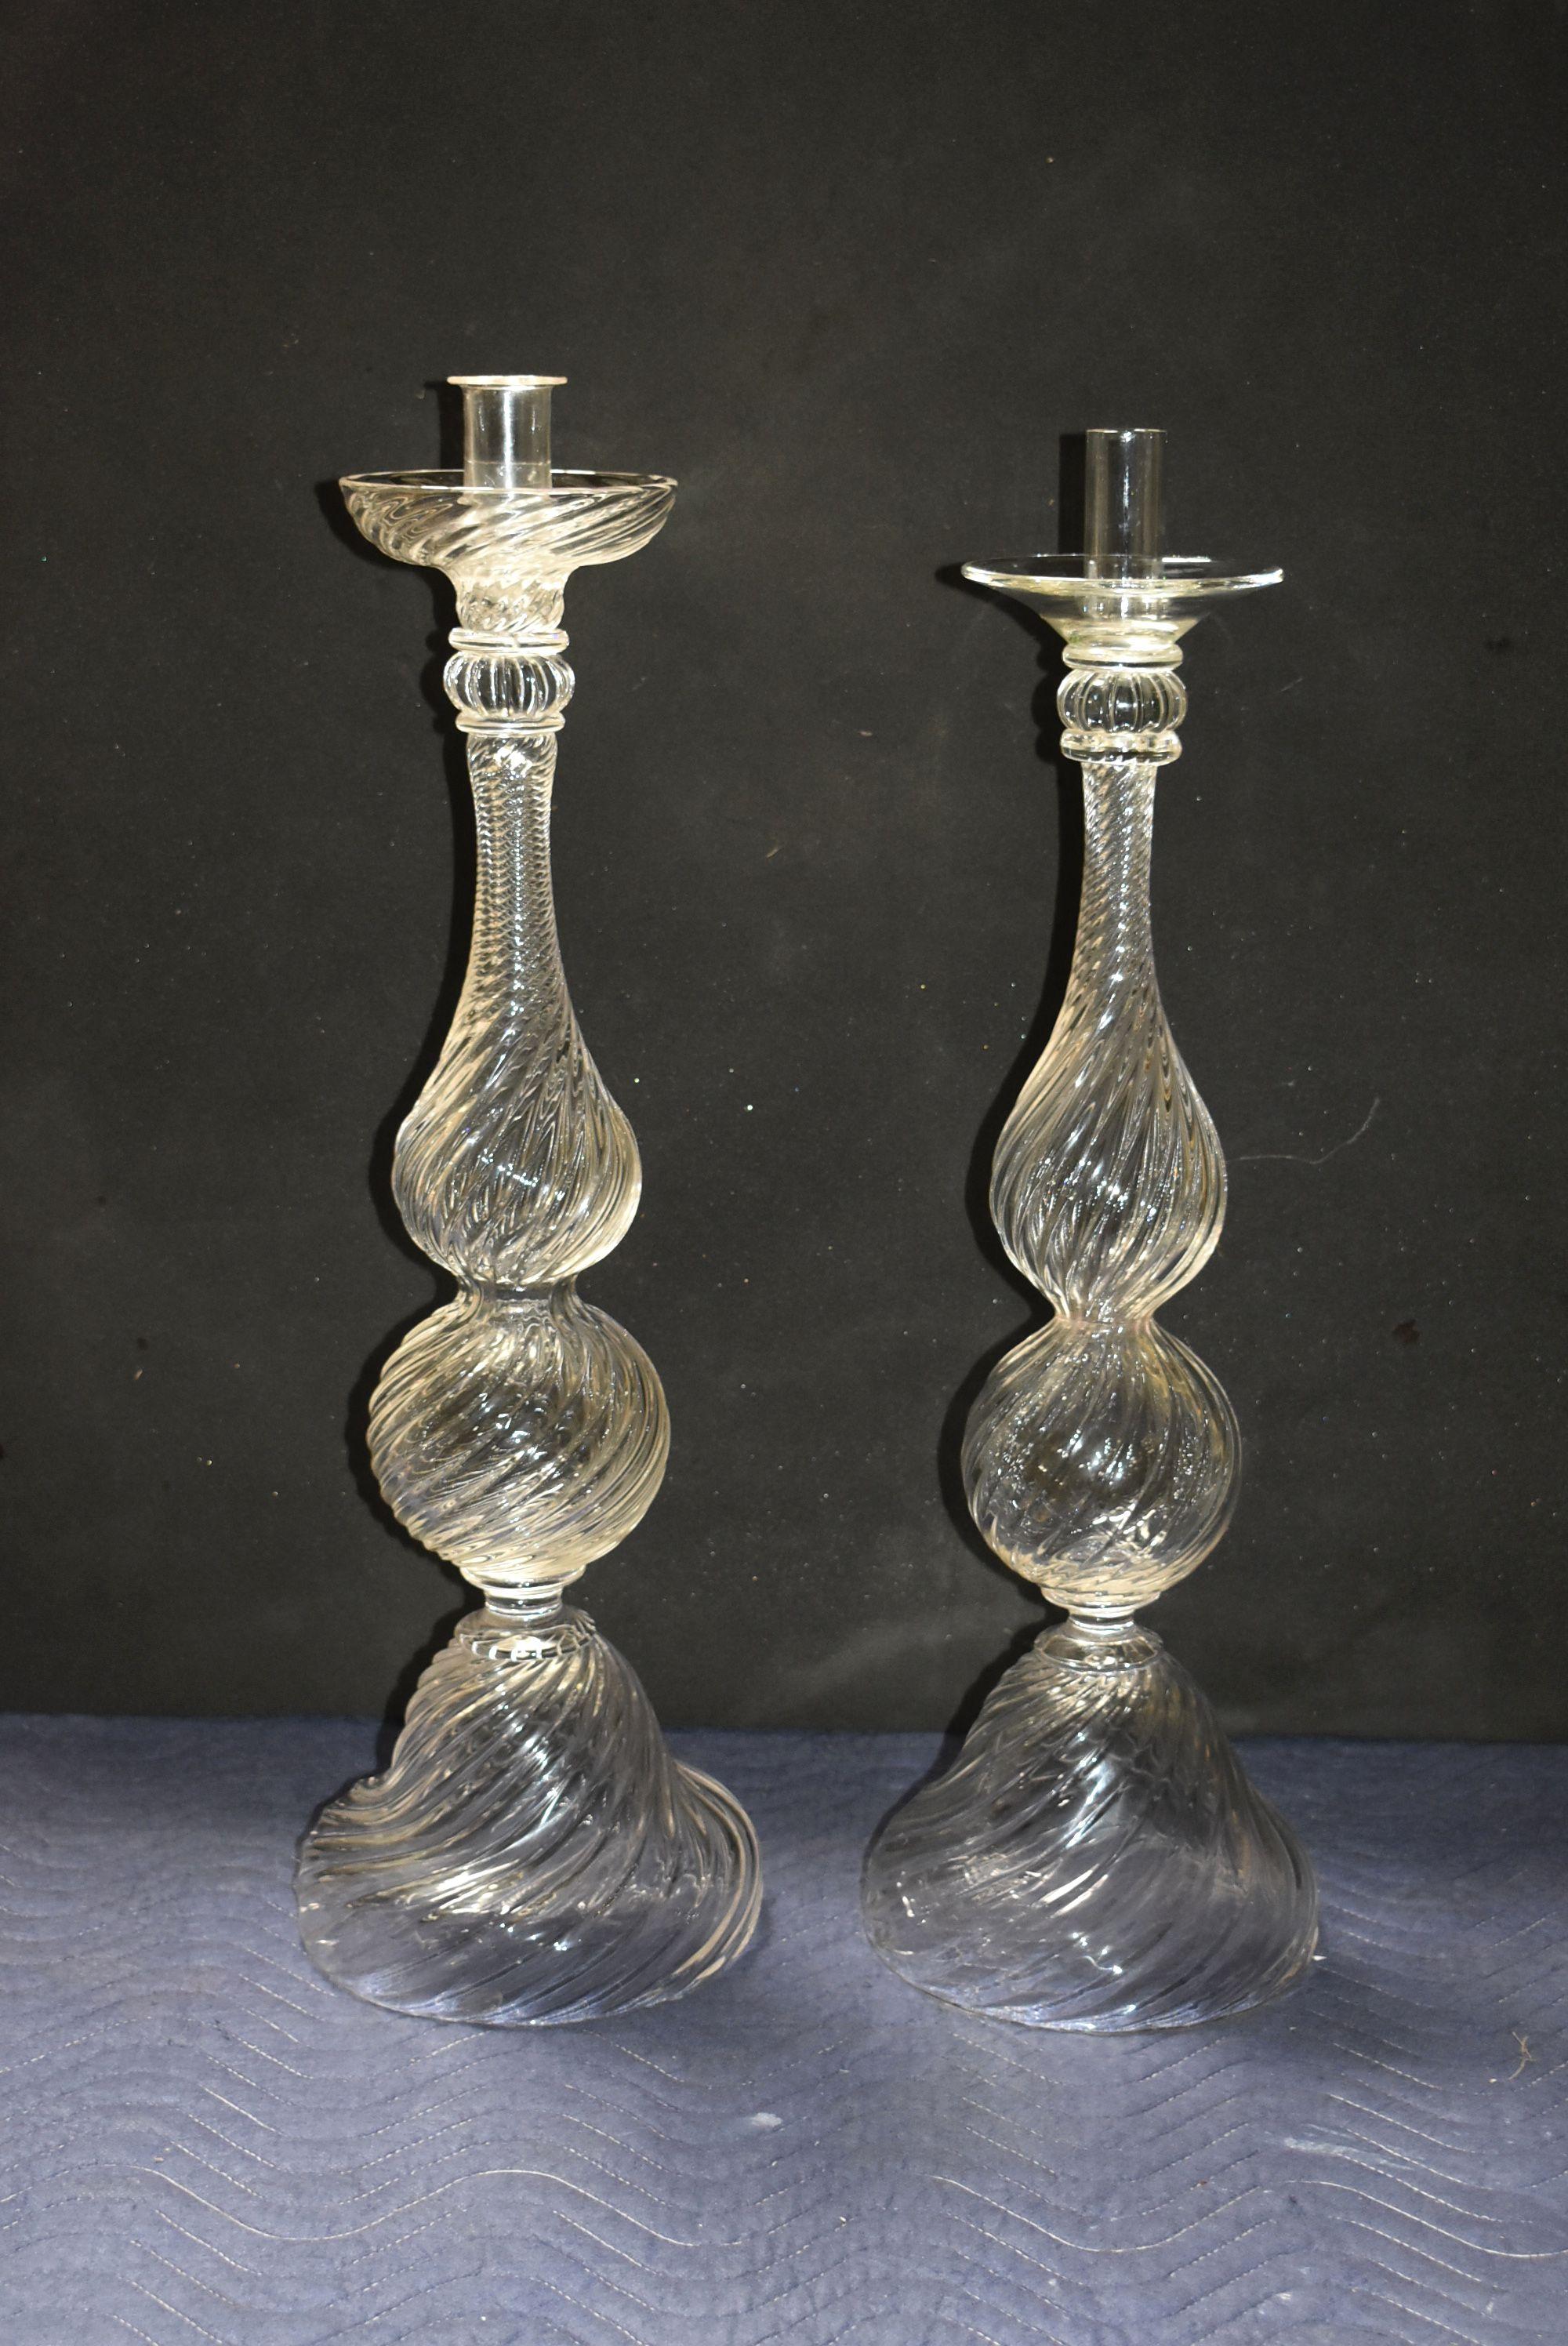 Two imposing Seguso Murano glass candle holders antique design.(signed by artist)
Only one is signed.
Dimension:
Signed one diameter 8